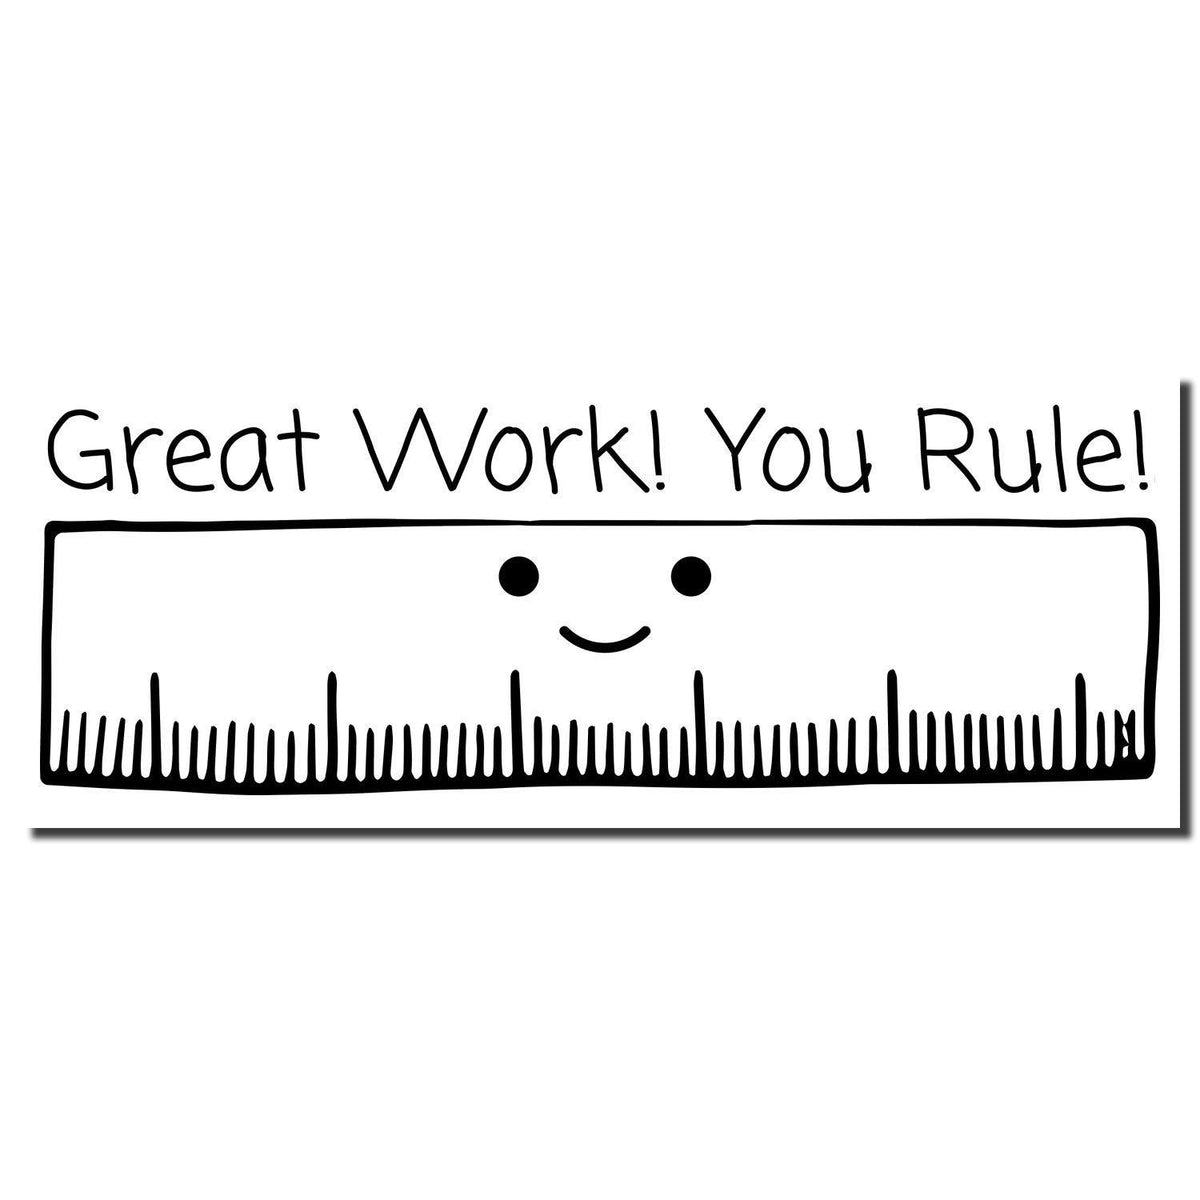 Enlarged Imprint Great Work You Rule Rubber Stamp Sample